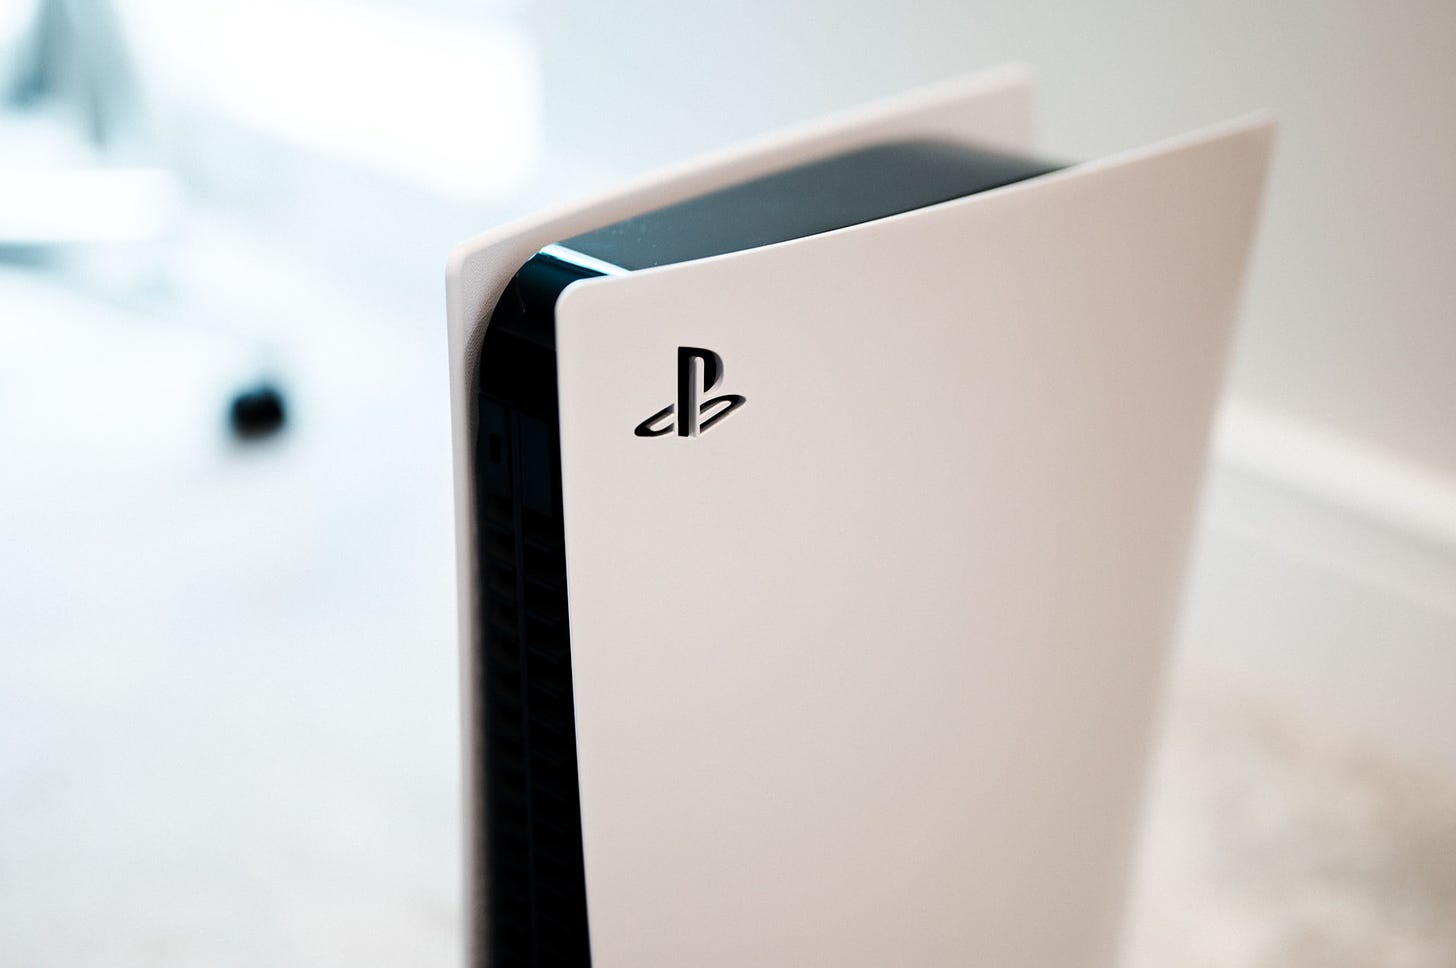 Playstation 5 Sales Expected to Pick Up in 2021